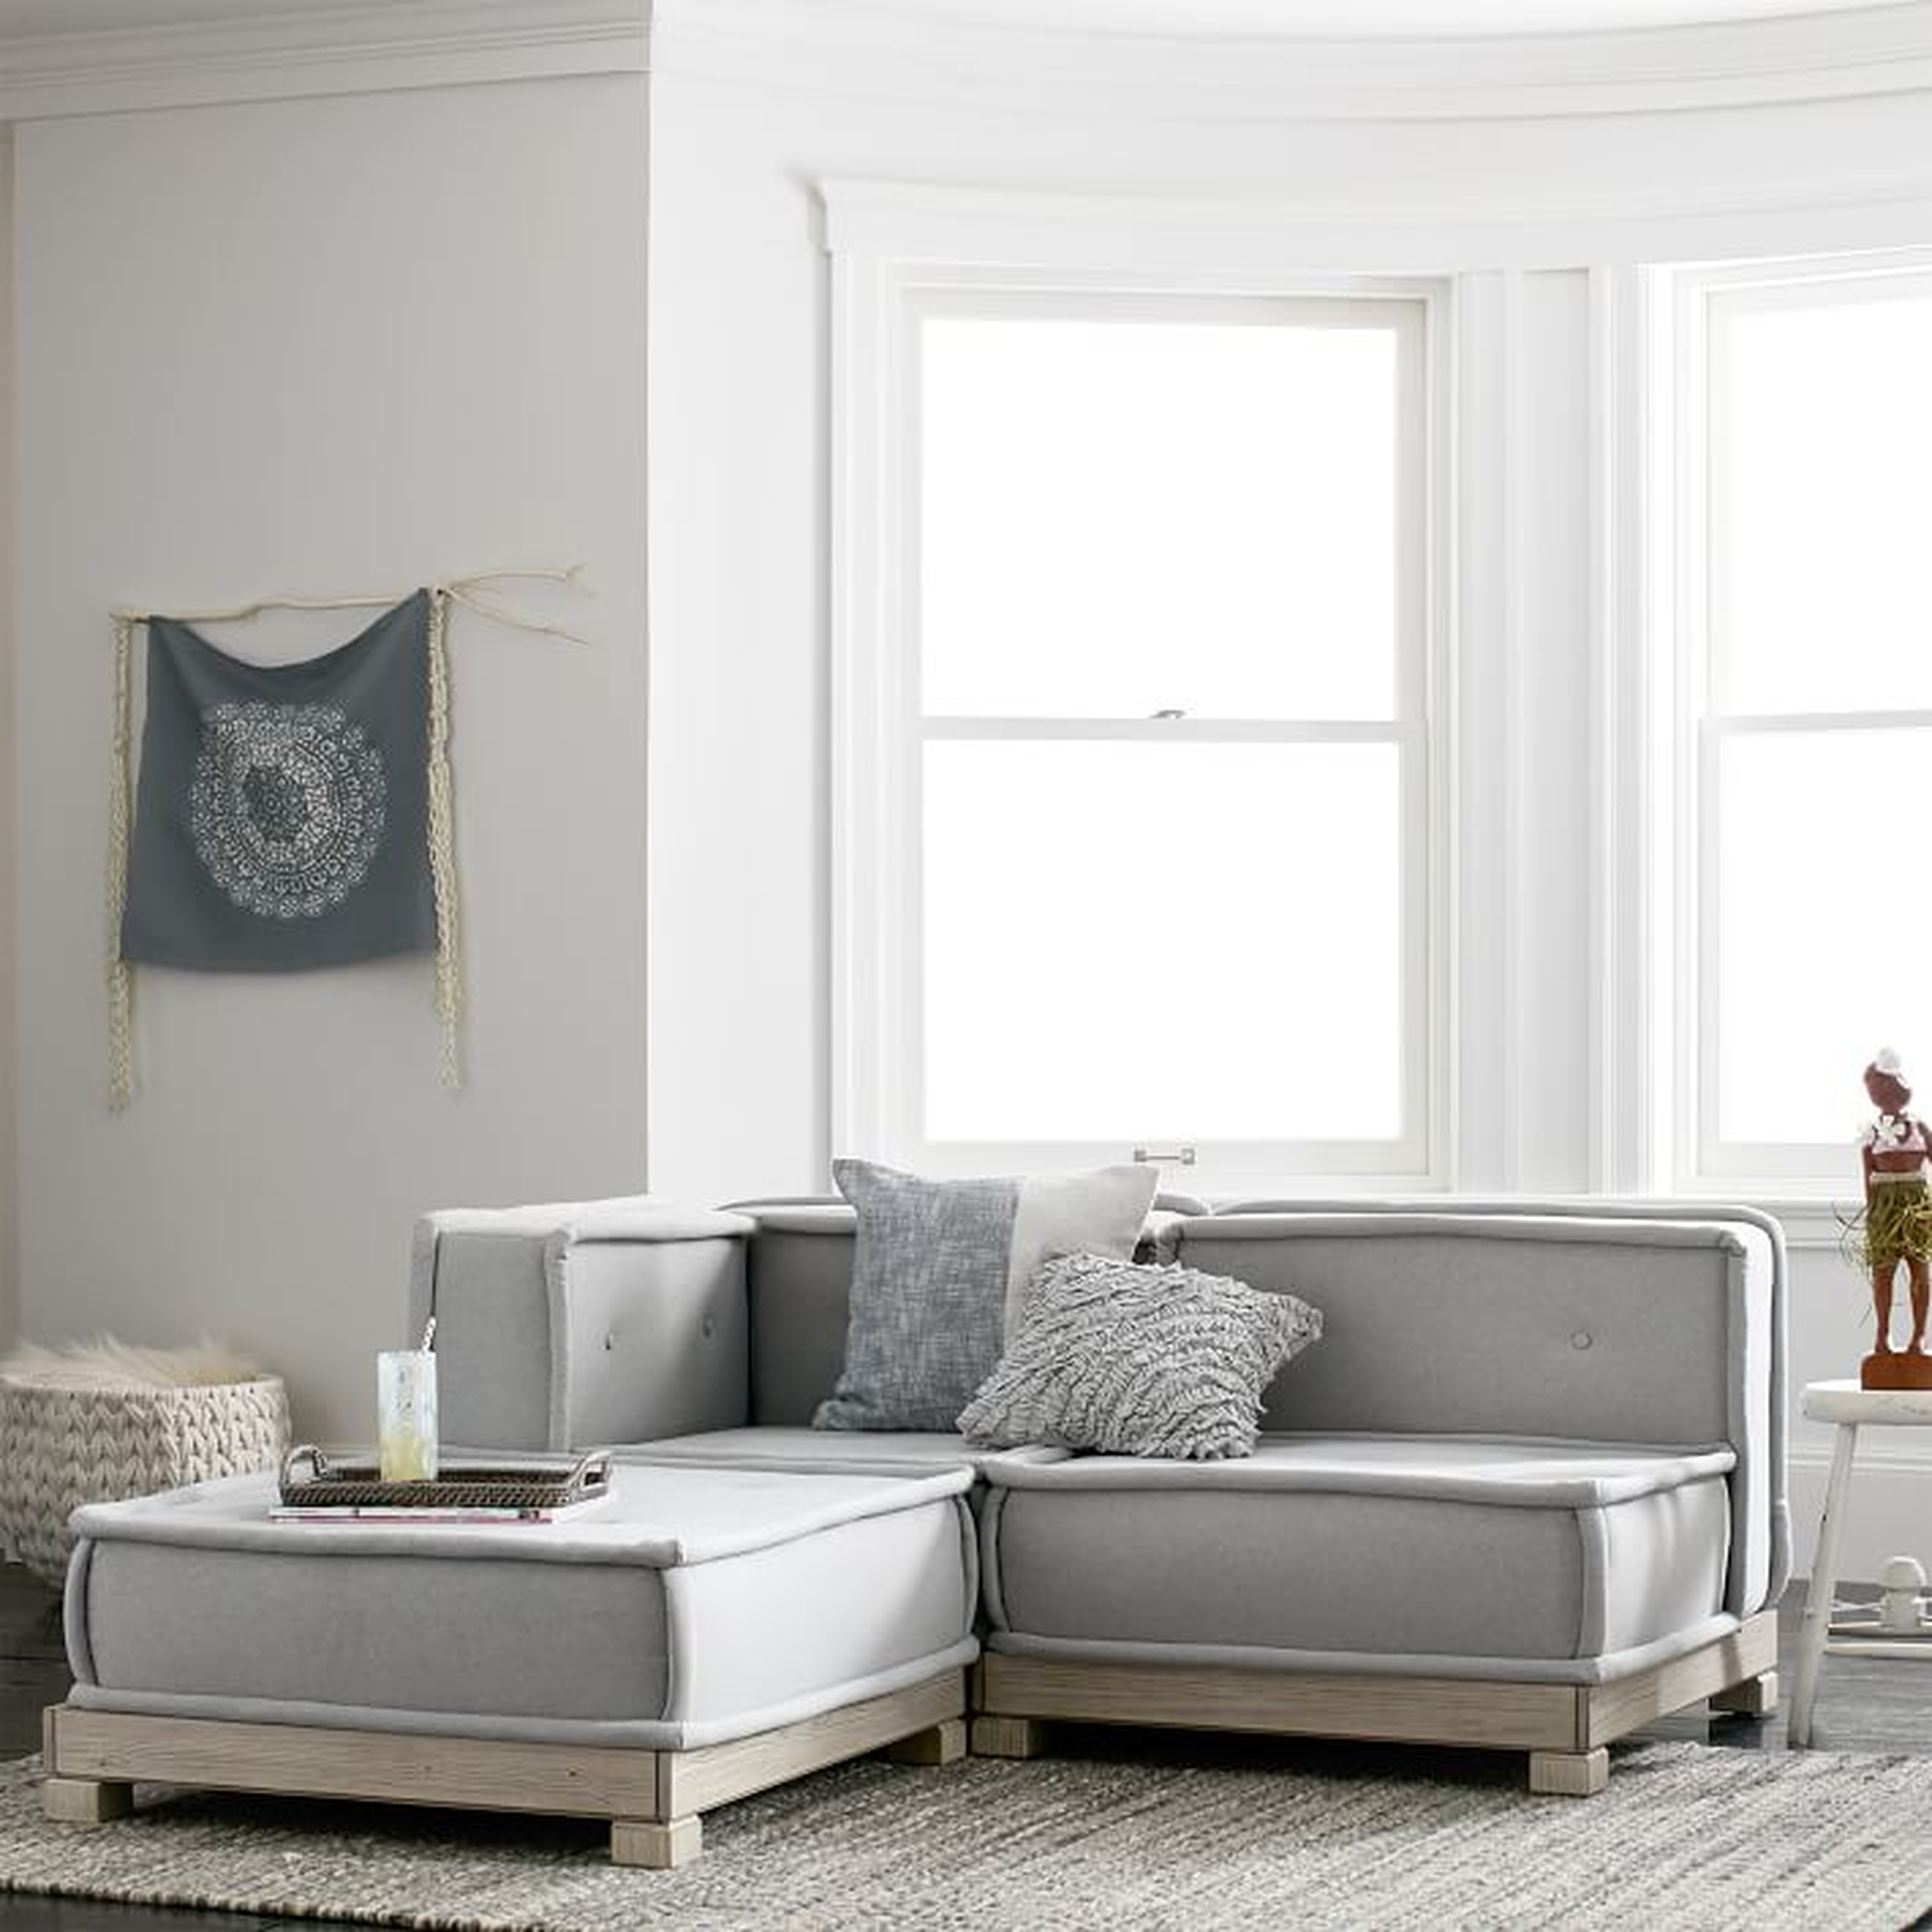 Cushy Lounge Sectional Set, Light Gray, Faux Suede - Pottery Barn Teen